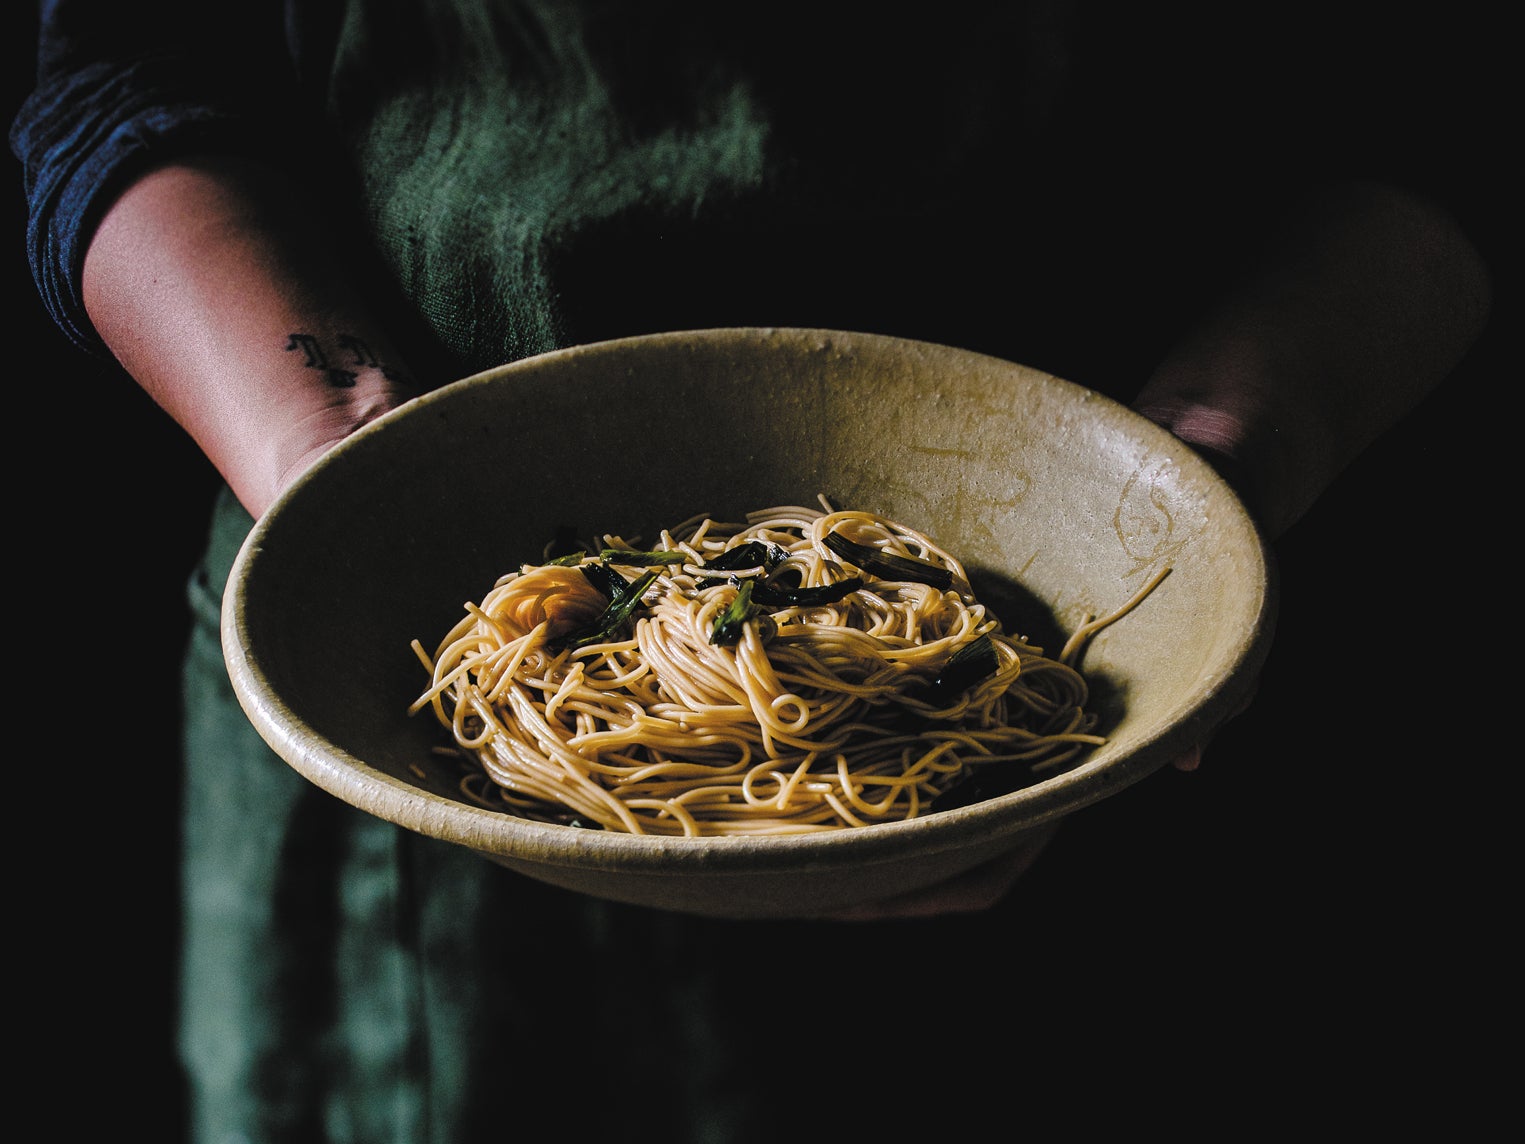 ‘A quintessential, old Shanghai dish – a humble, yet extremely satisfying, bowl of noodles’